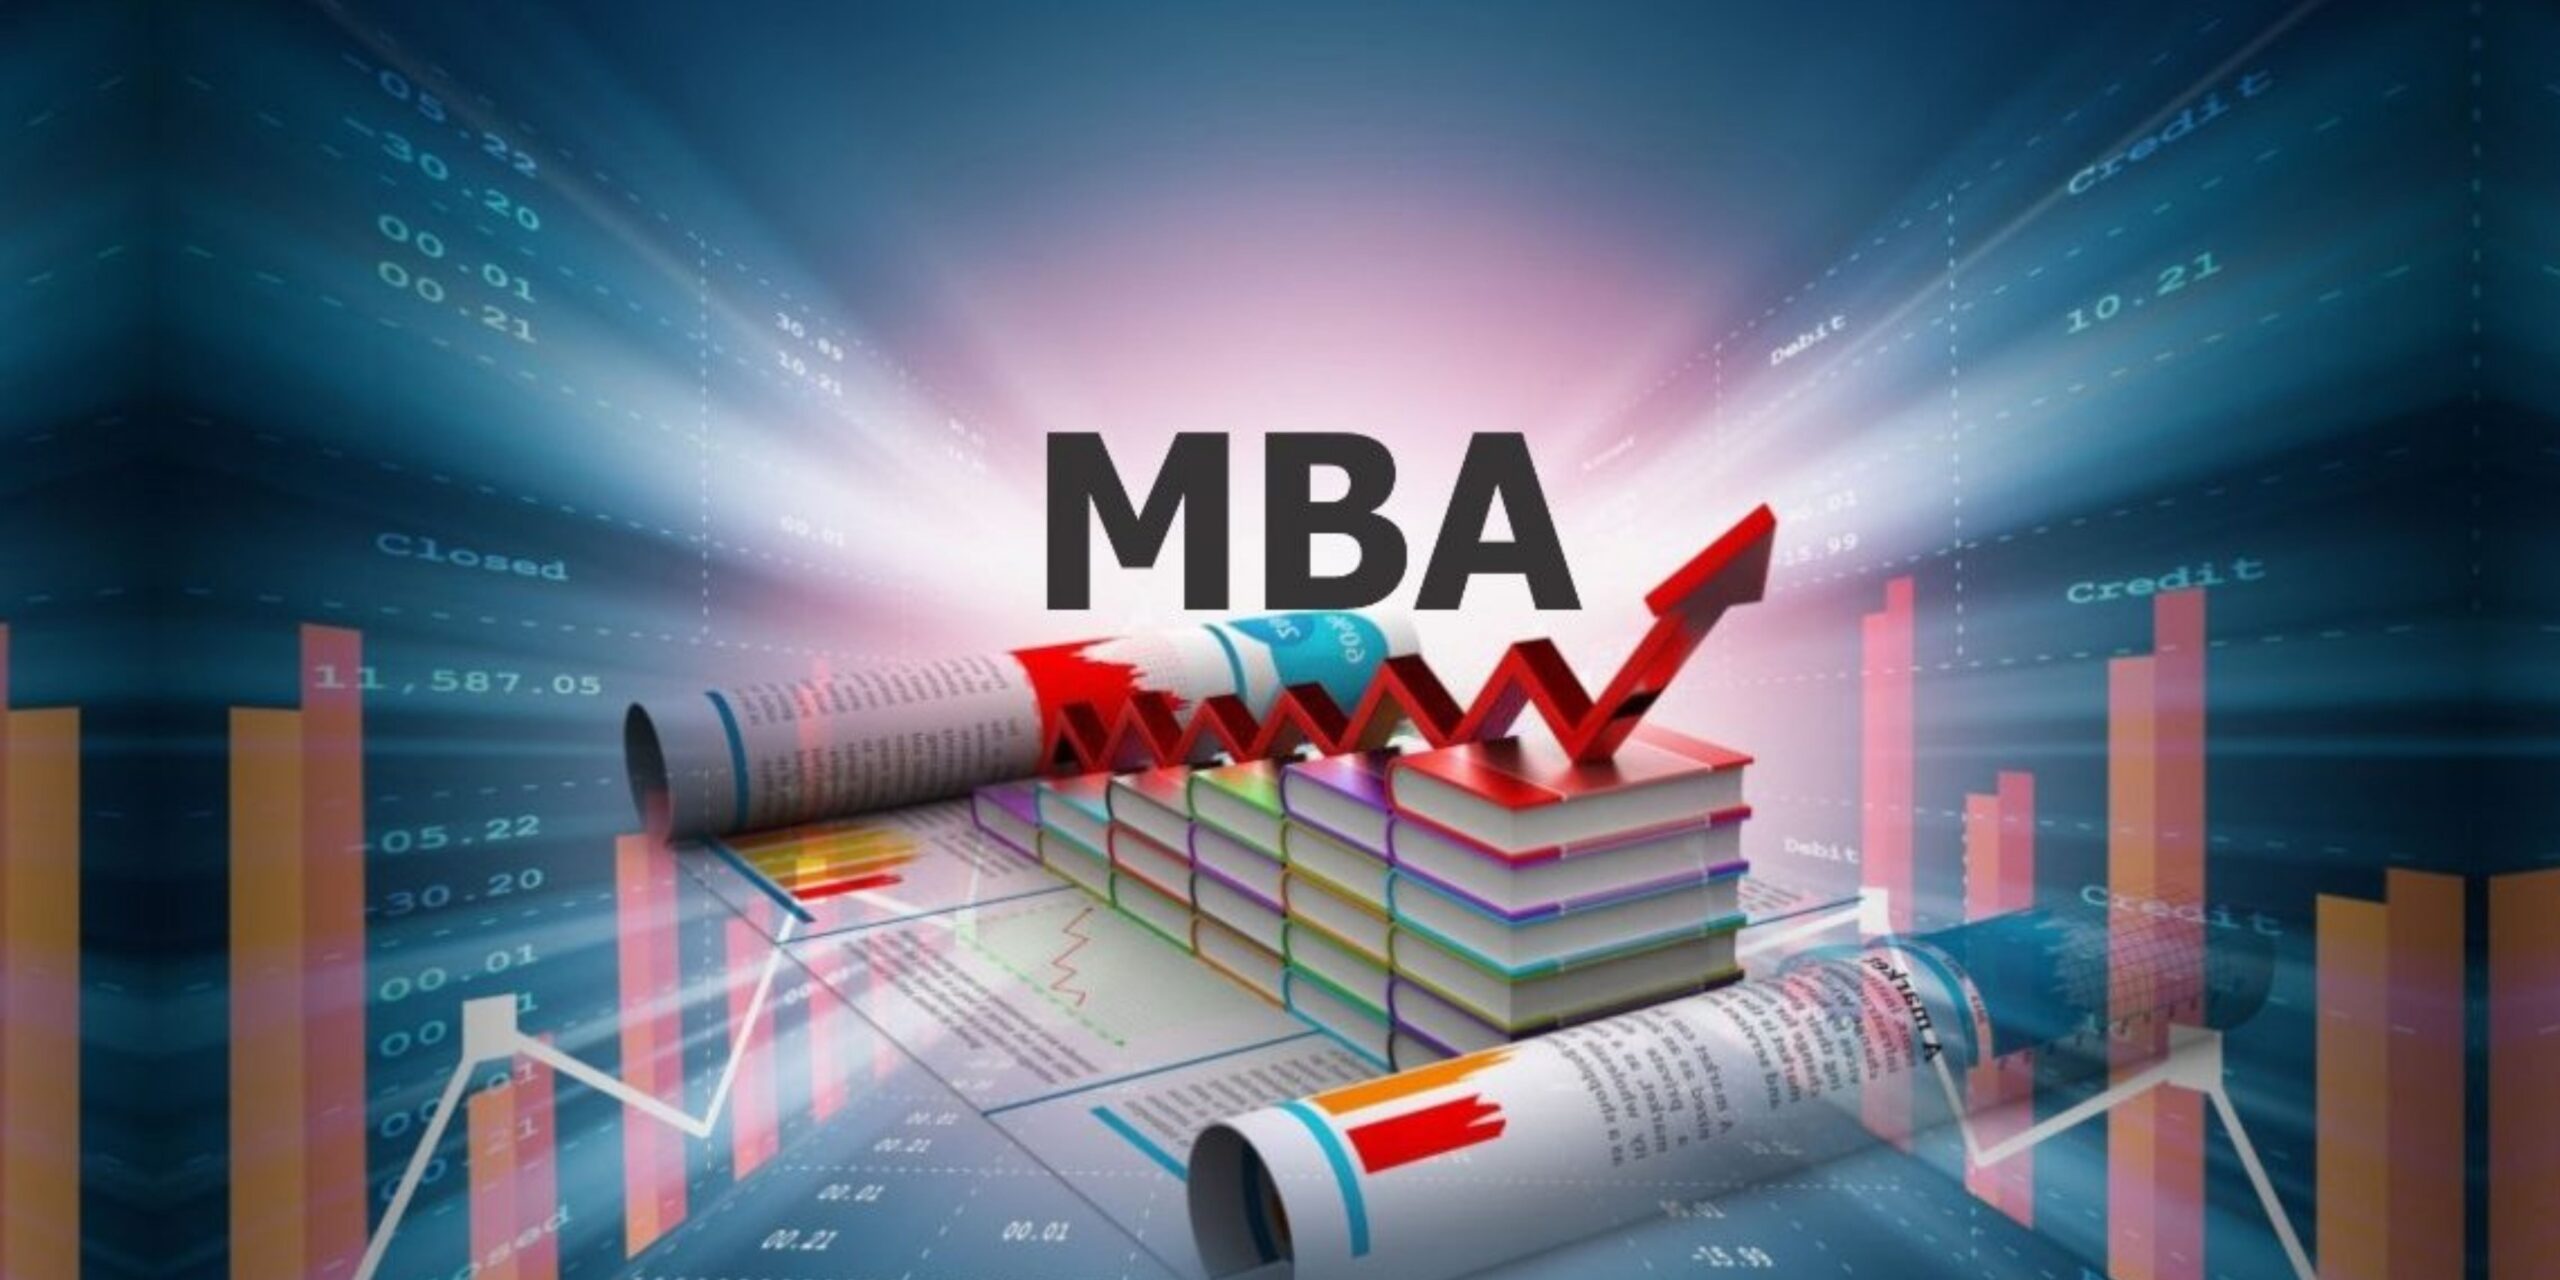 Part Time MBA